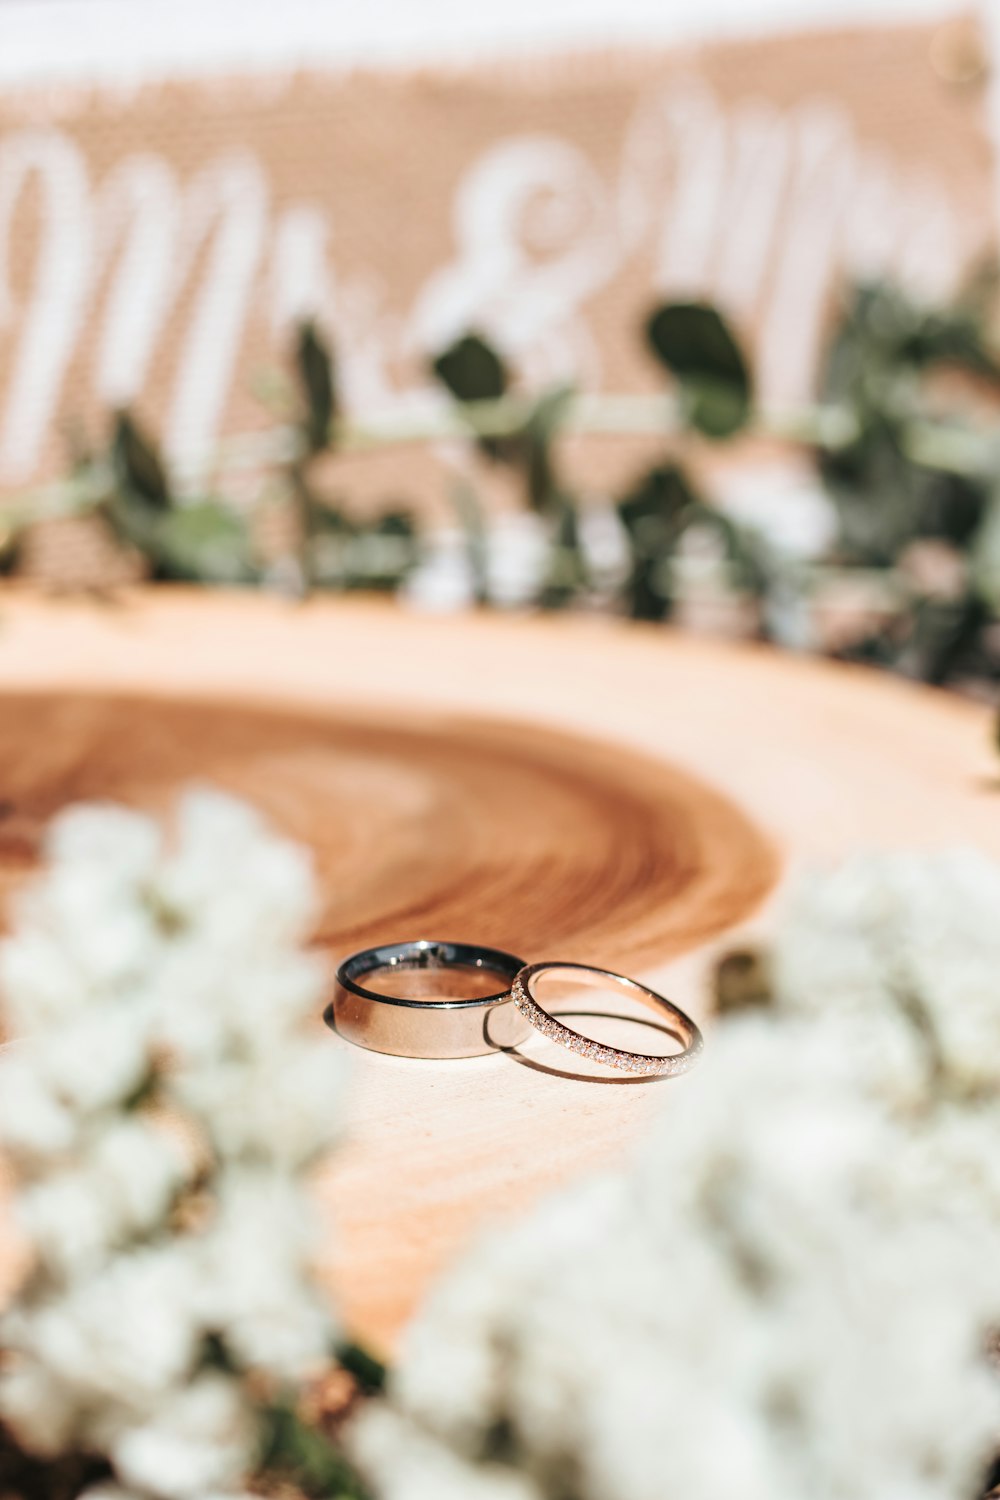 silver wedding band on brown wooden round table